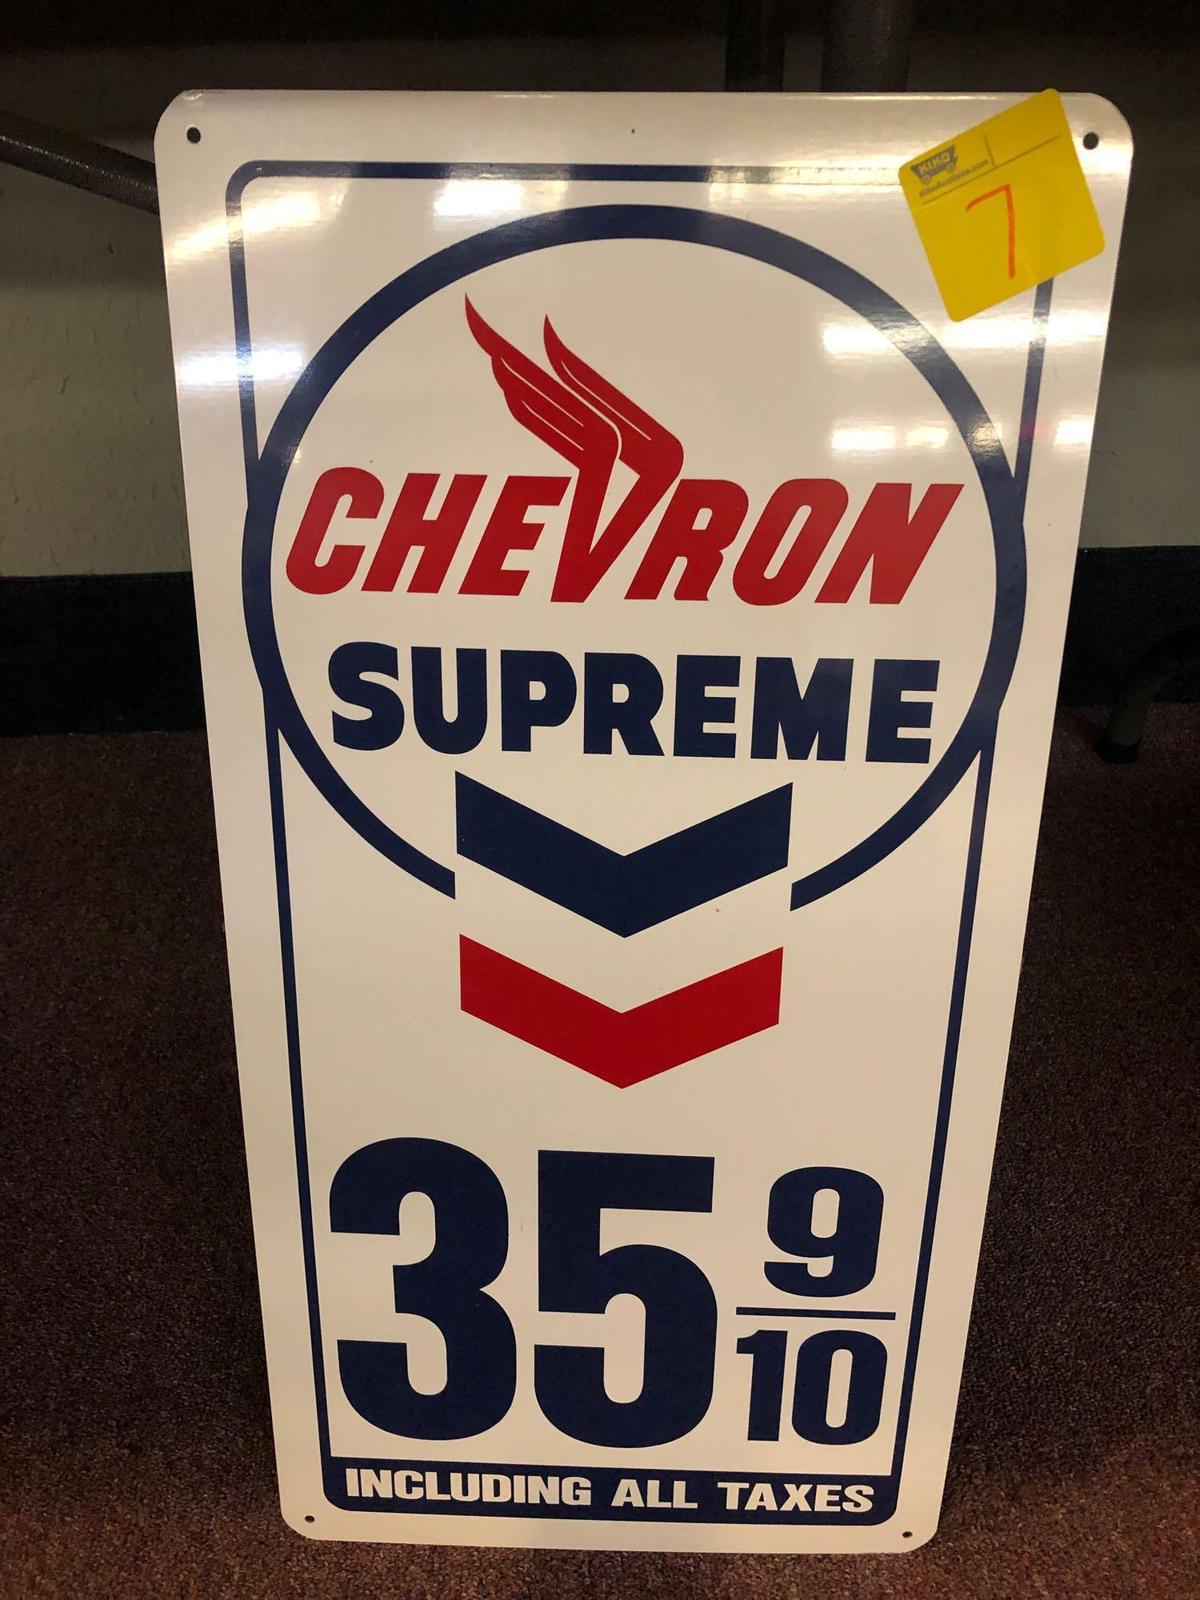 Chevron Supreme 35 9/10 Including all taxes metal sign